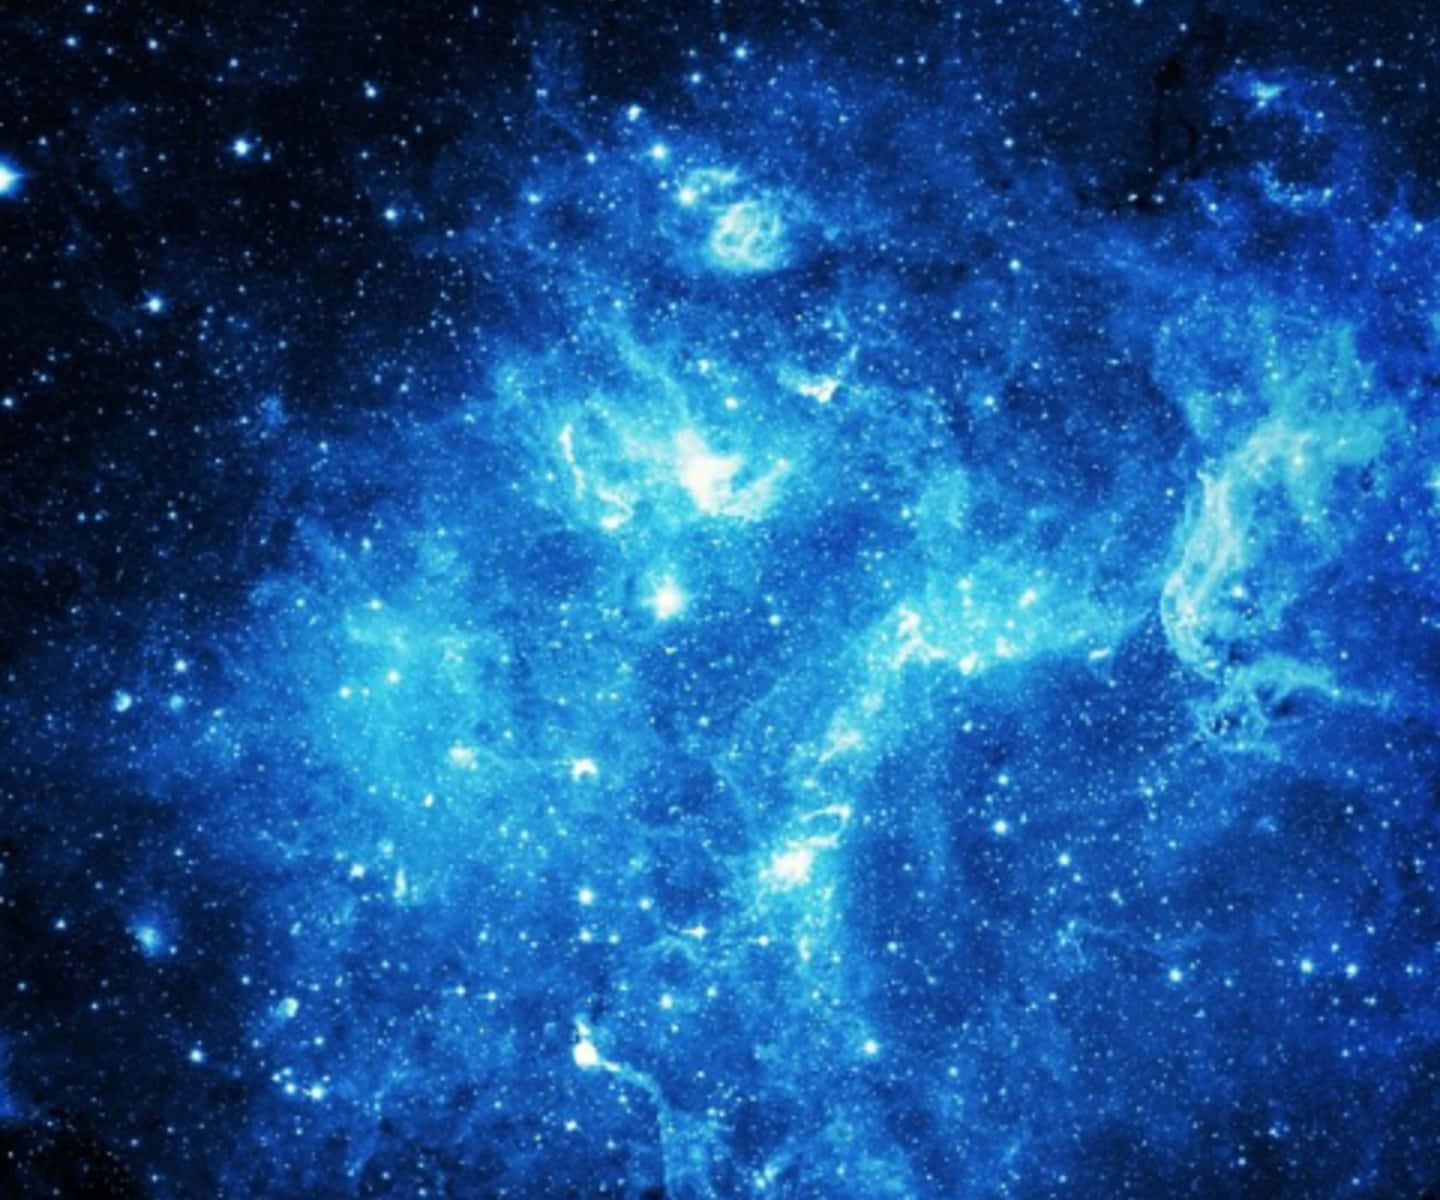 Explore the Beauty of the Blue Galaxy